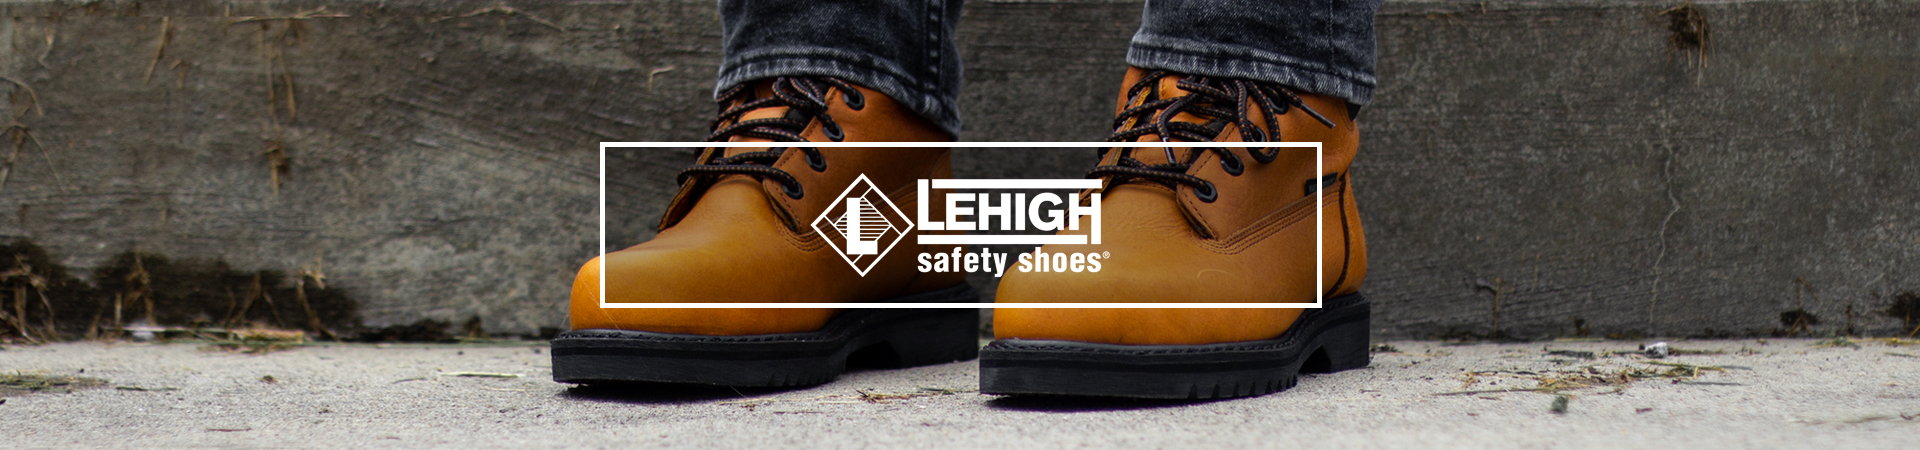 Lehigh Safety Shoes | Lehigh Outfitters